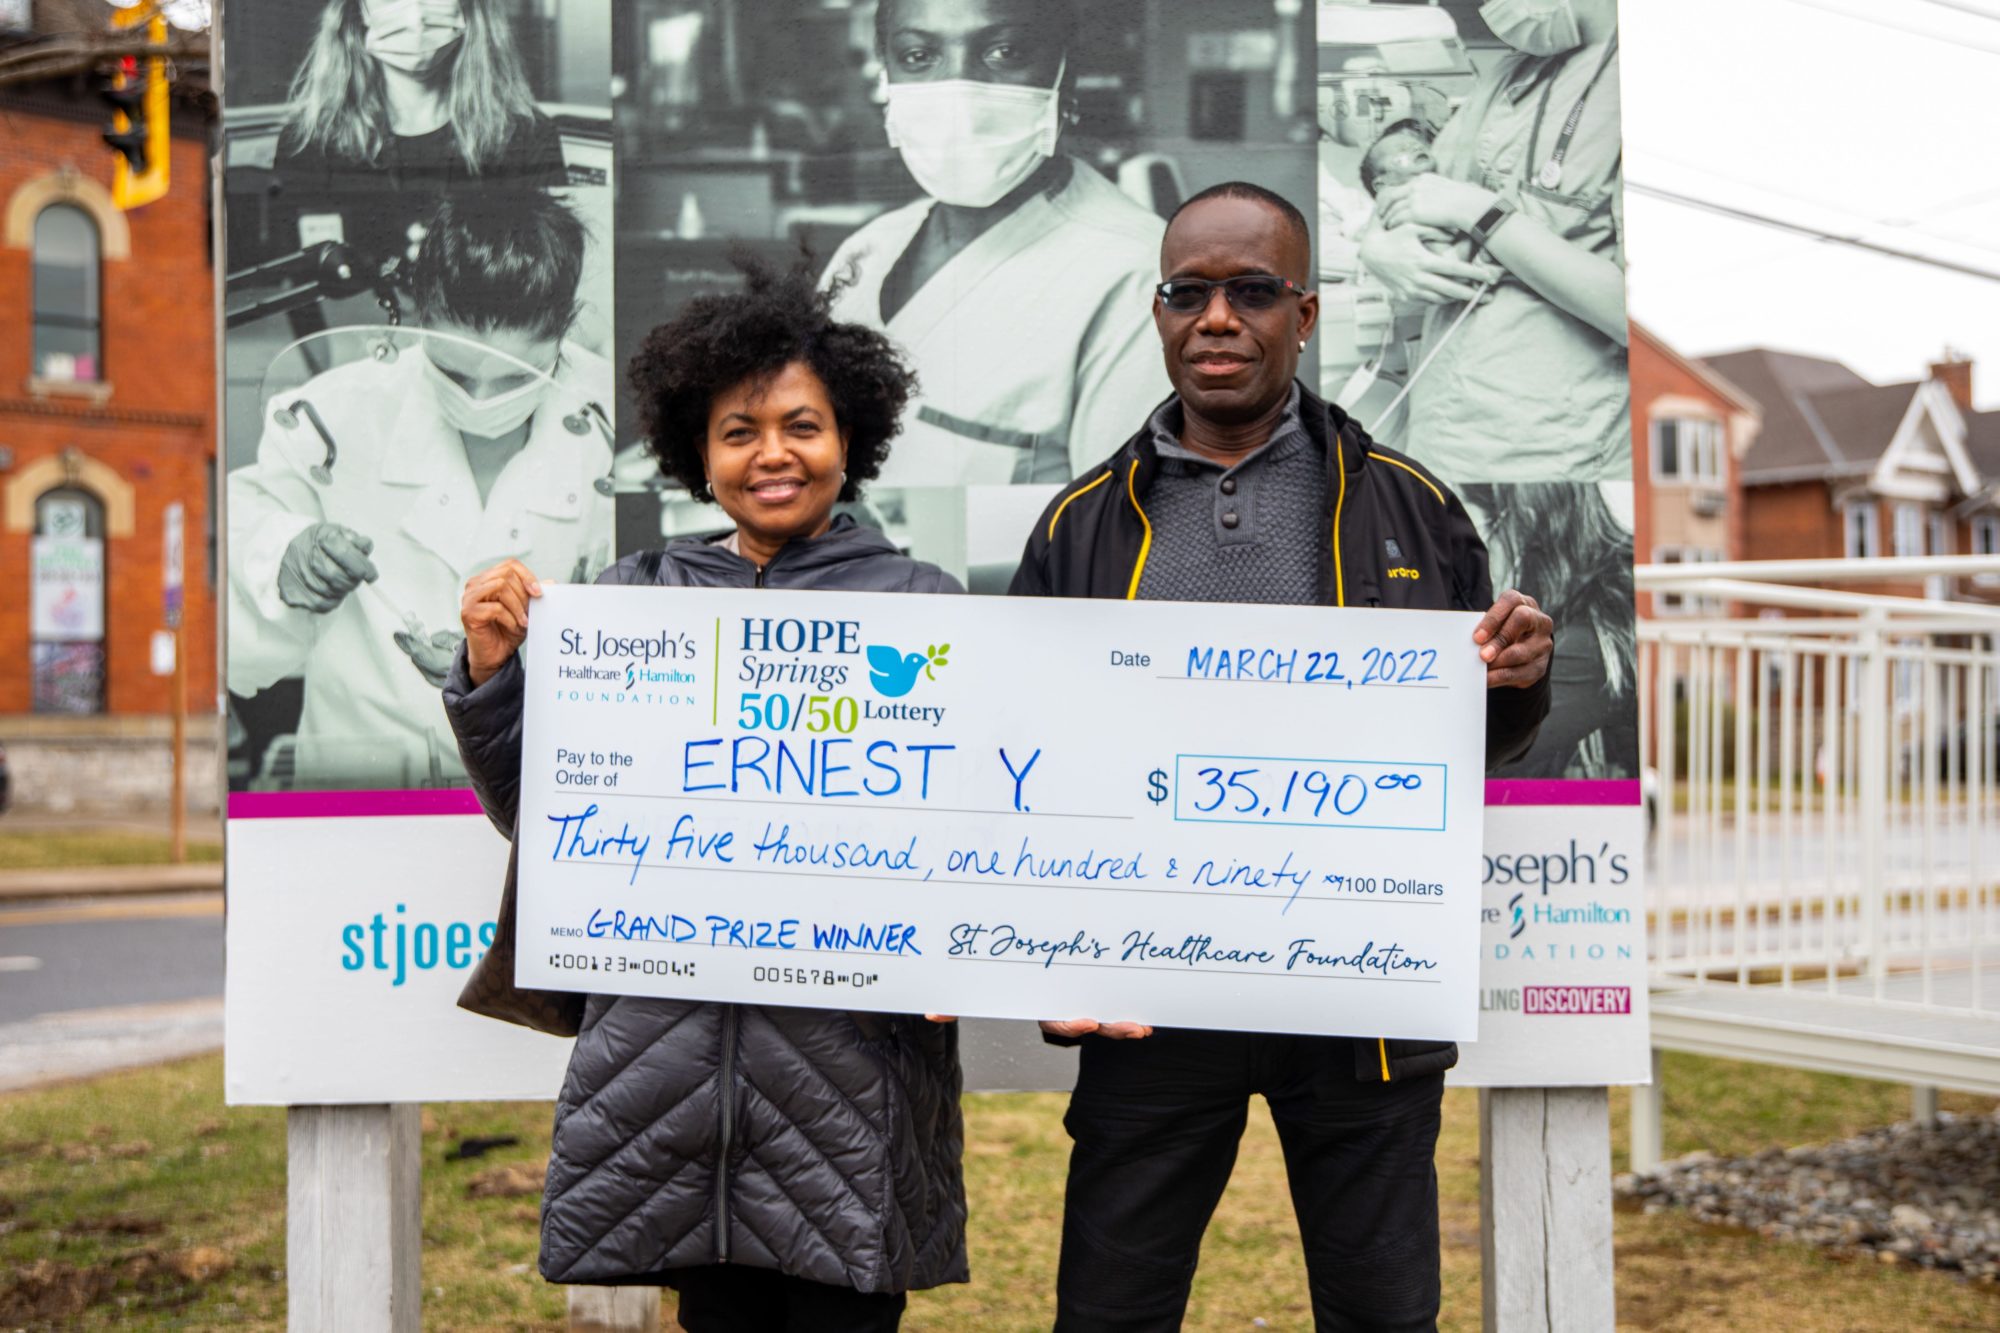 A photo of our grand prize lottery winner. The couple smiles while holding up a large novelty cheque for $35,190.